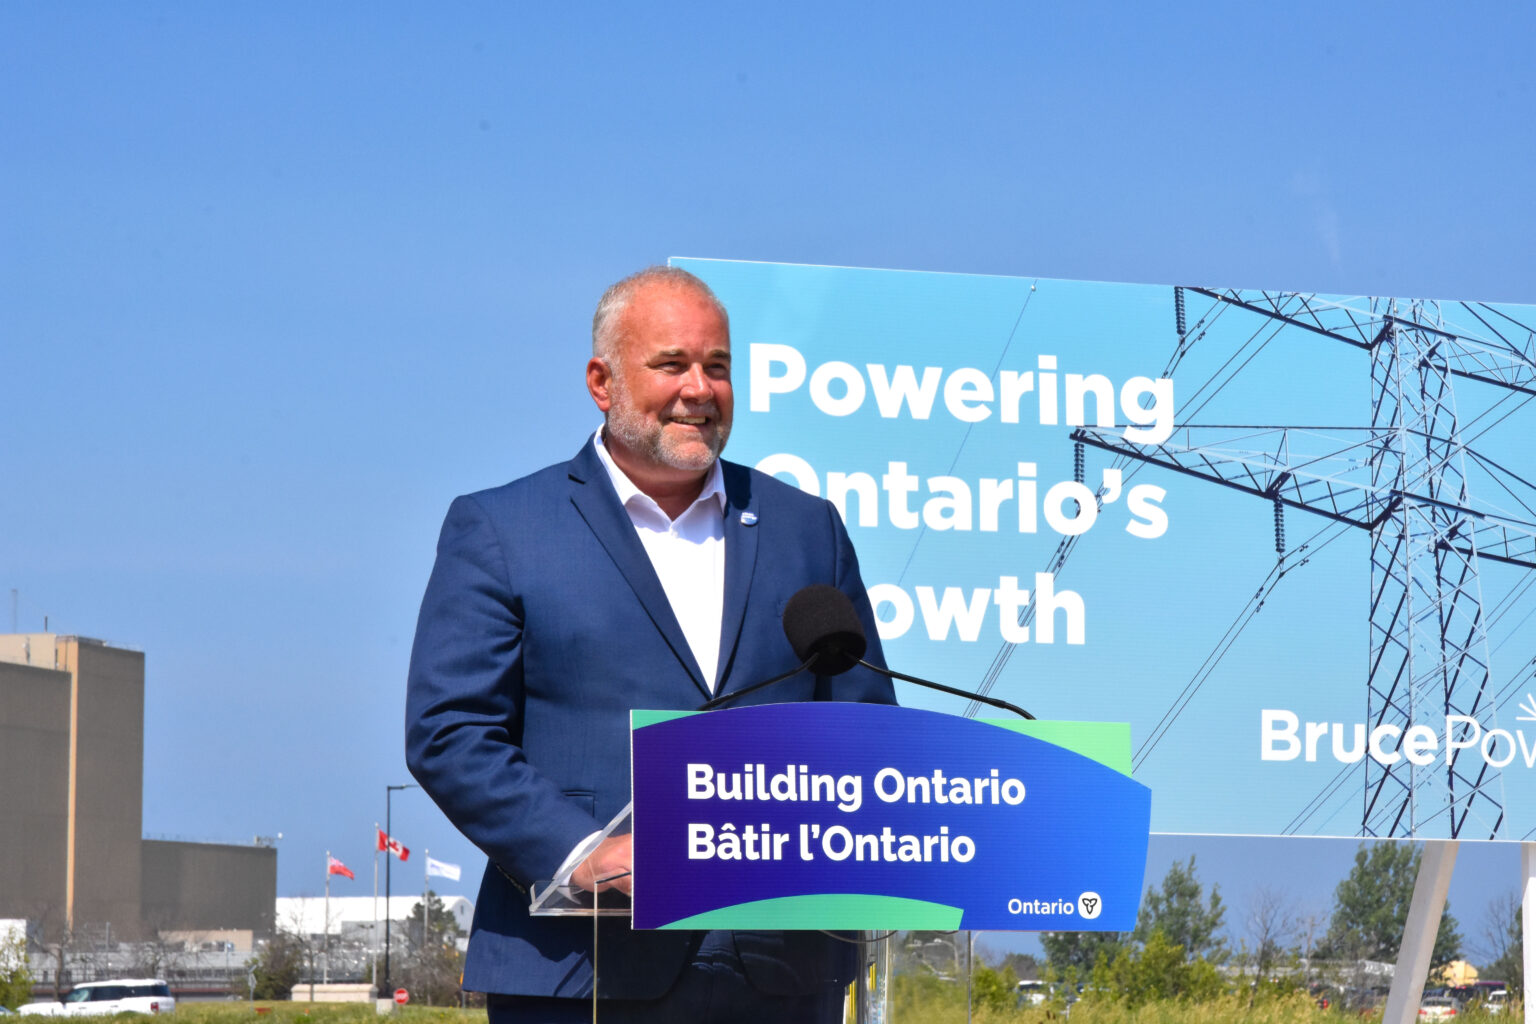 Ontario Minister of Energy, the Hon. Todd Smith, announces the government's support for planning and consultation to explore nuclear expansion July 5 at Bruce Power Image Credit: Bruce Power